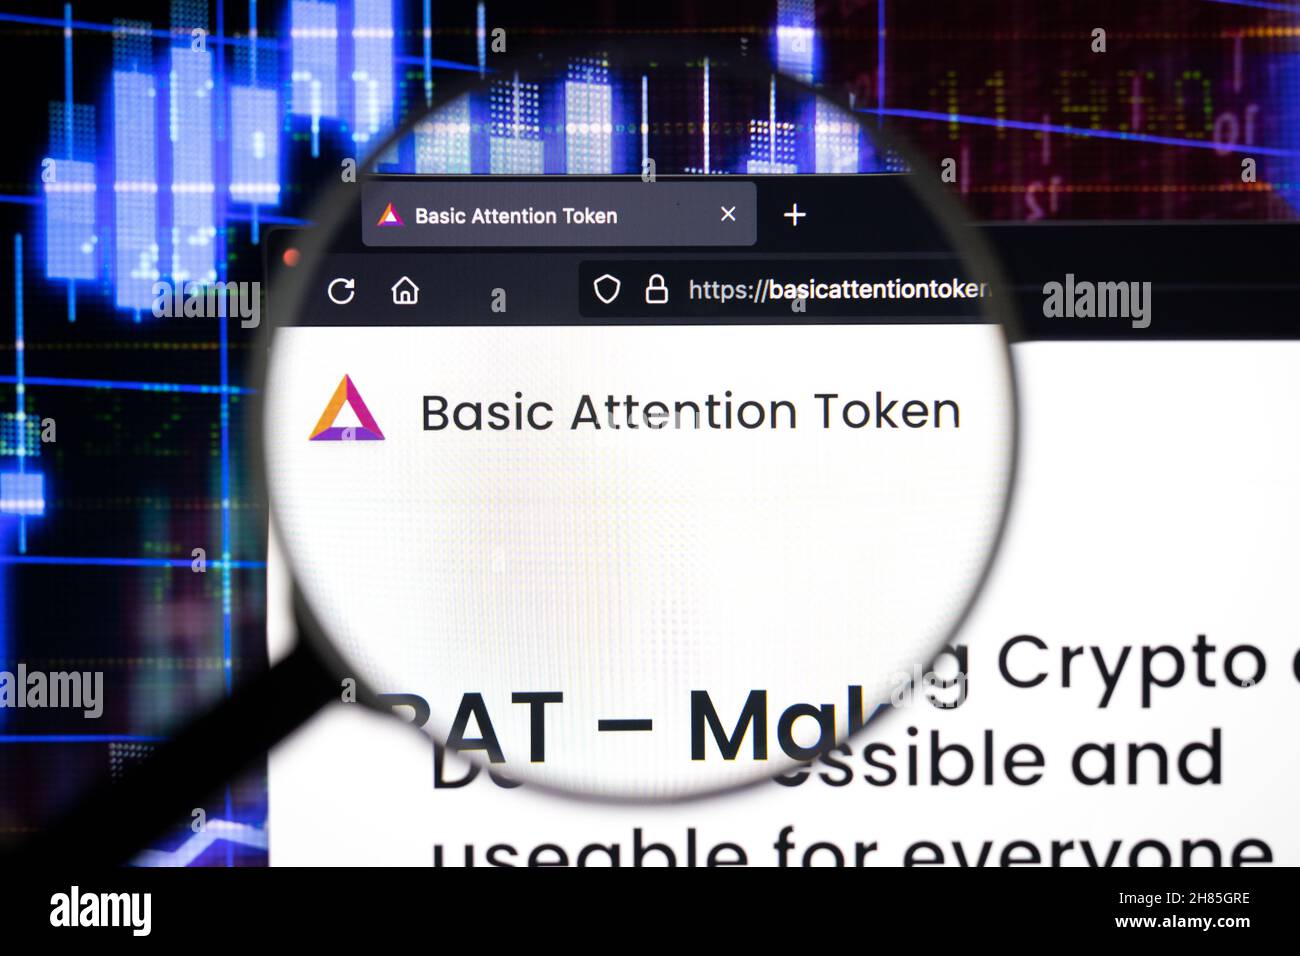 Basic Attention Token company logo on a website, seen on a computer screen through a magnifying glass. Stock Photo